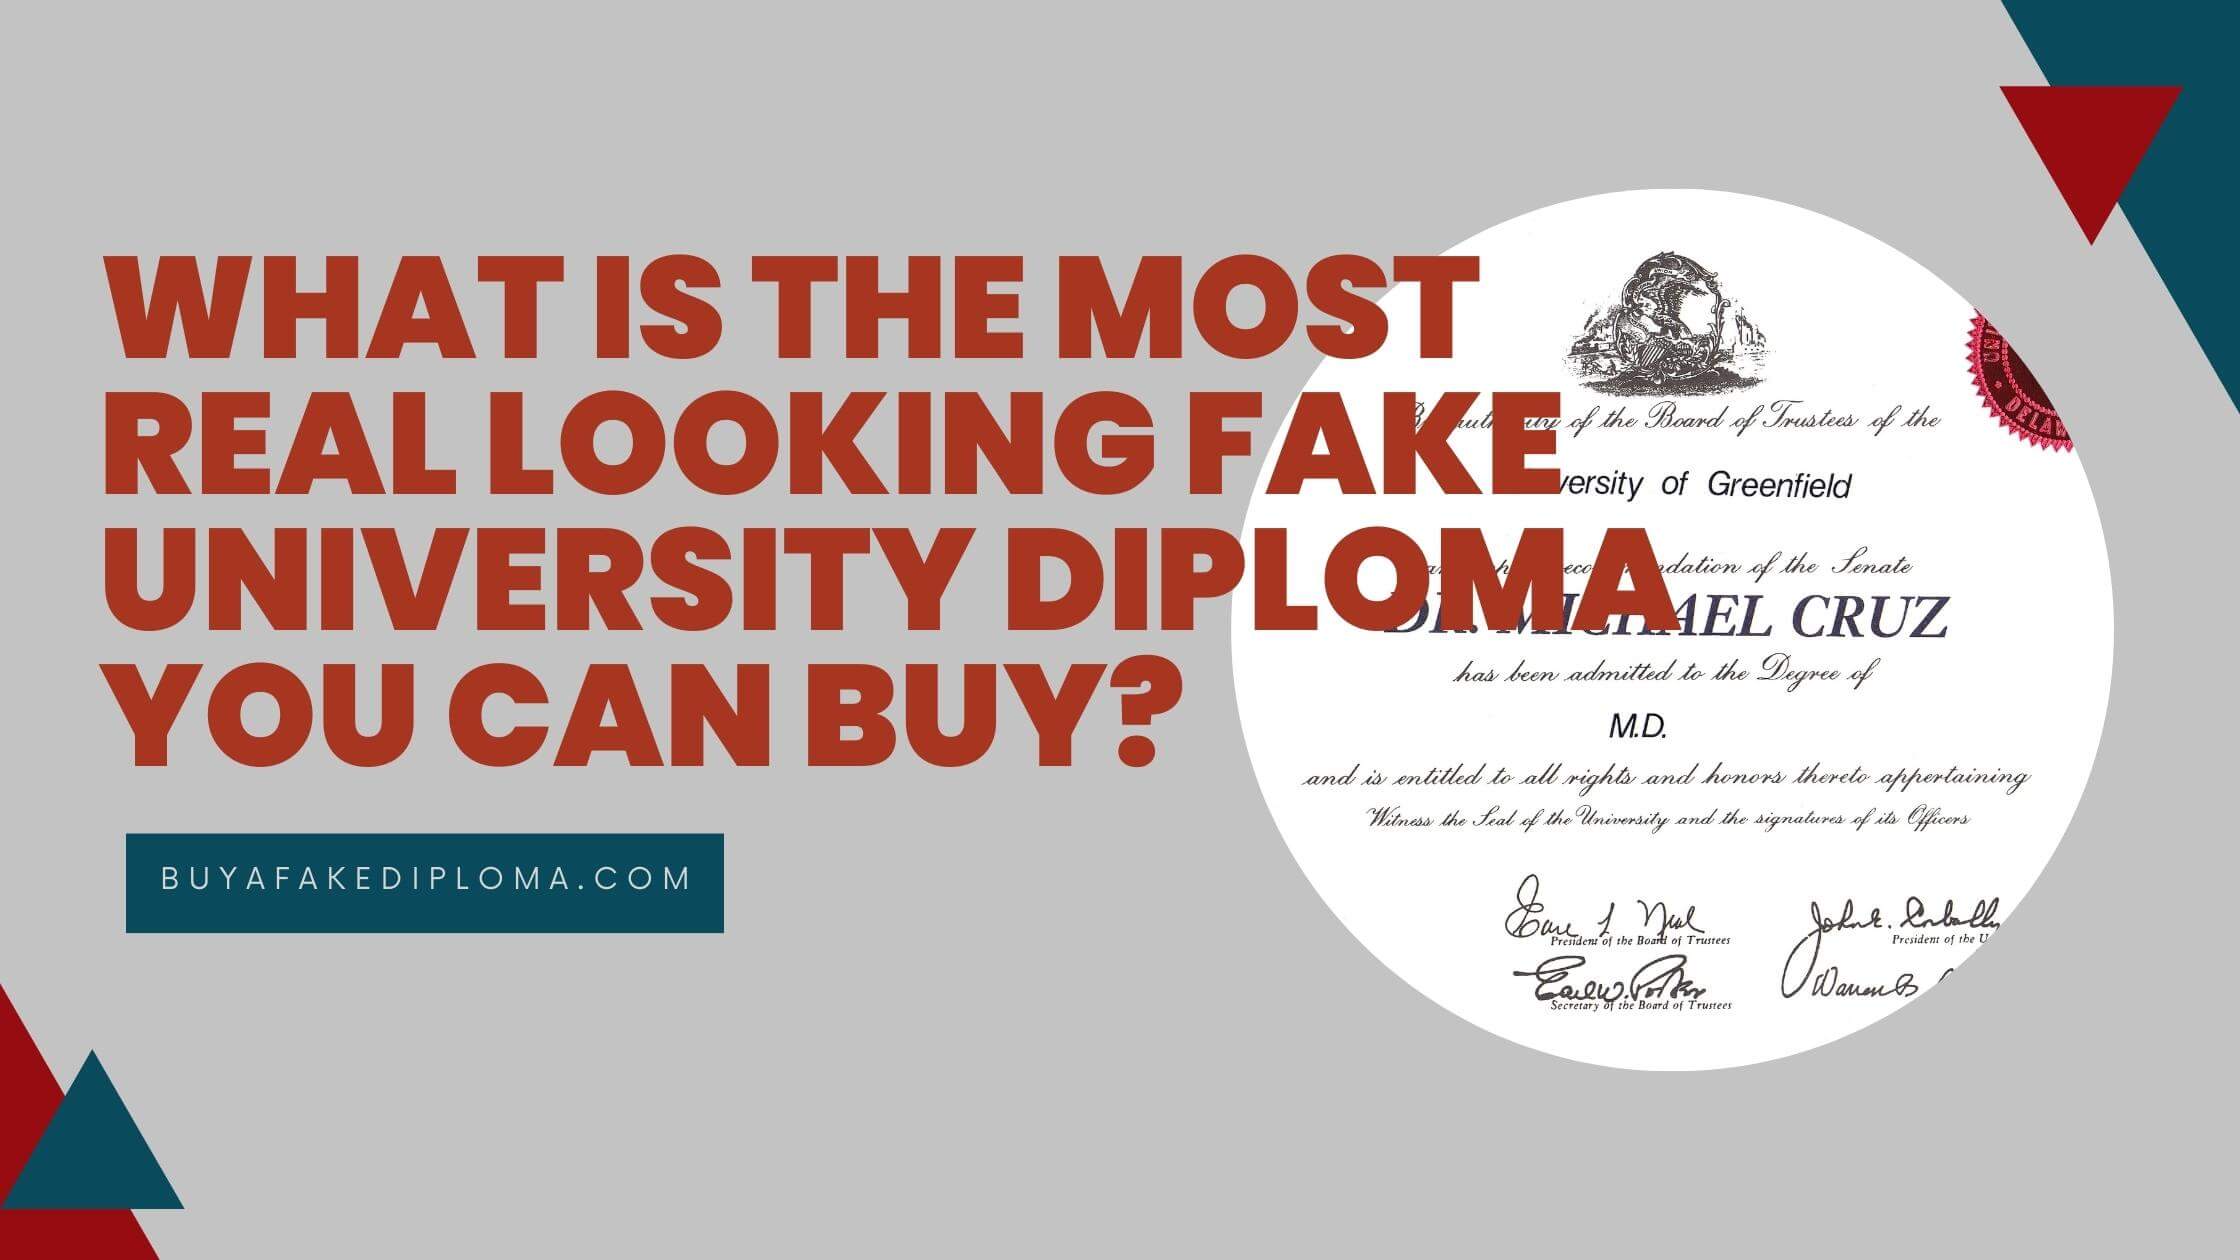 get the most real and best looking for university diploma online